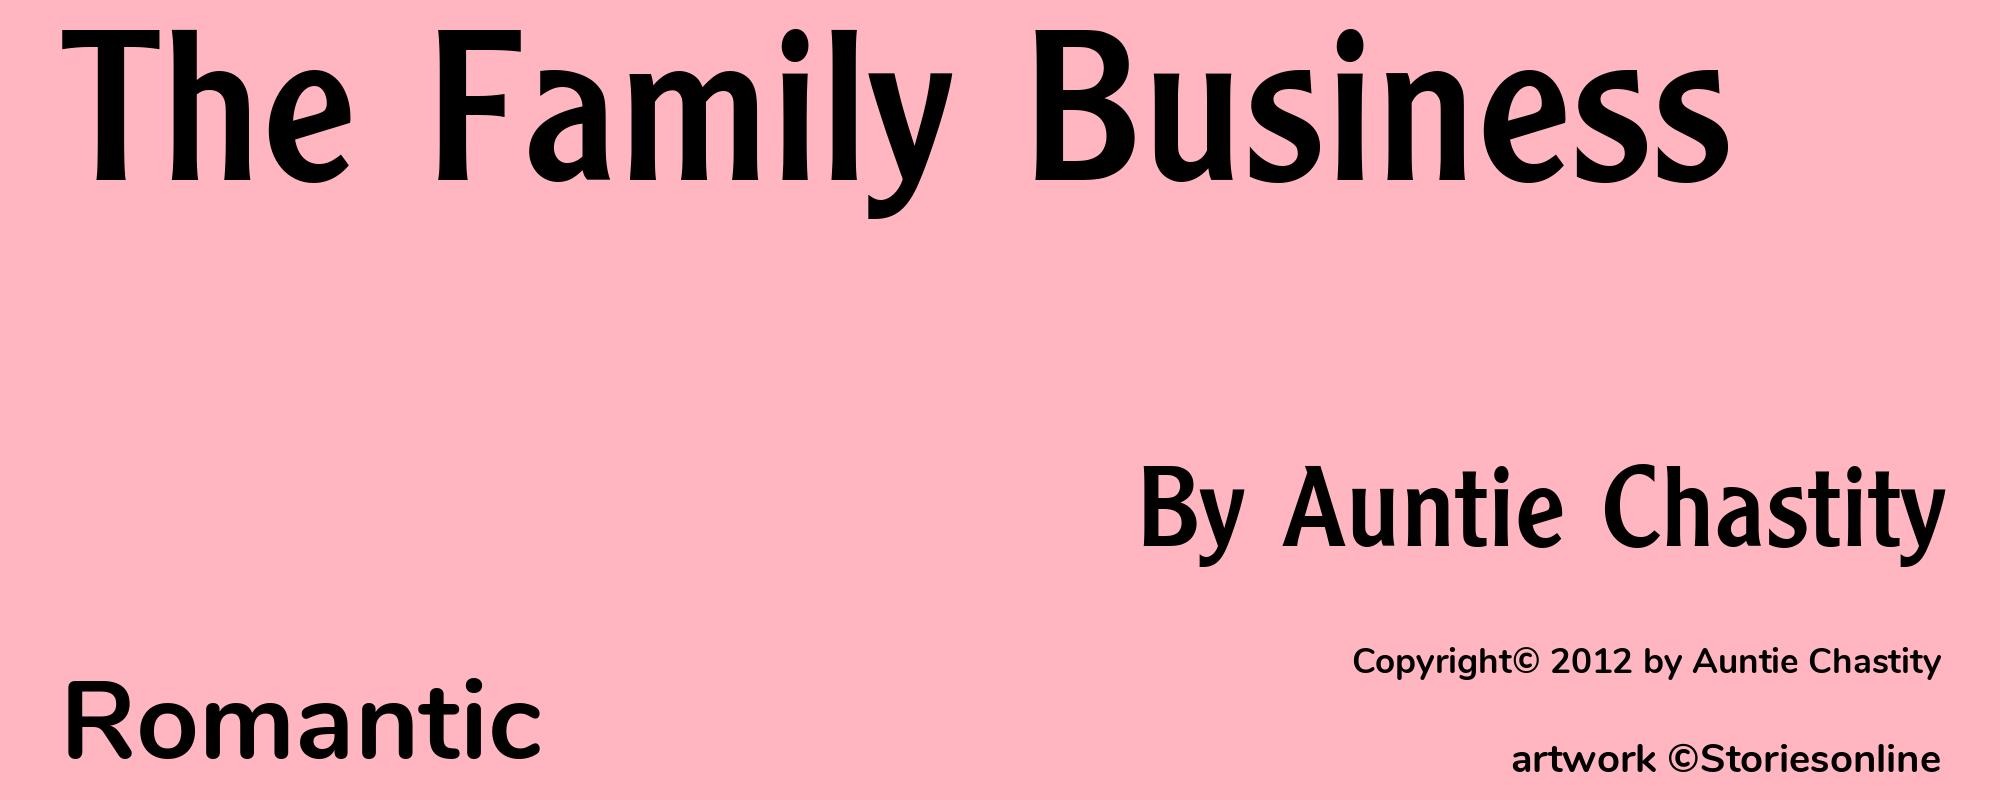 The Family Business - Cover